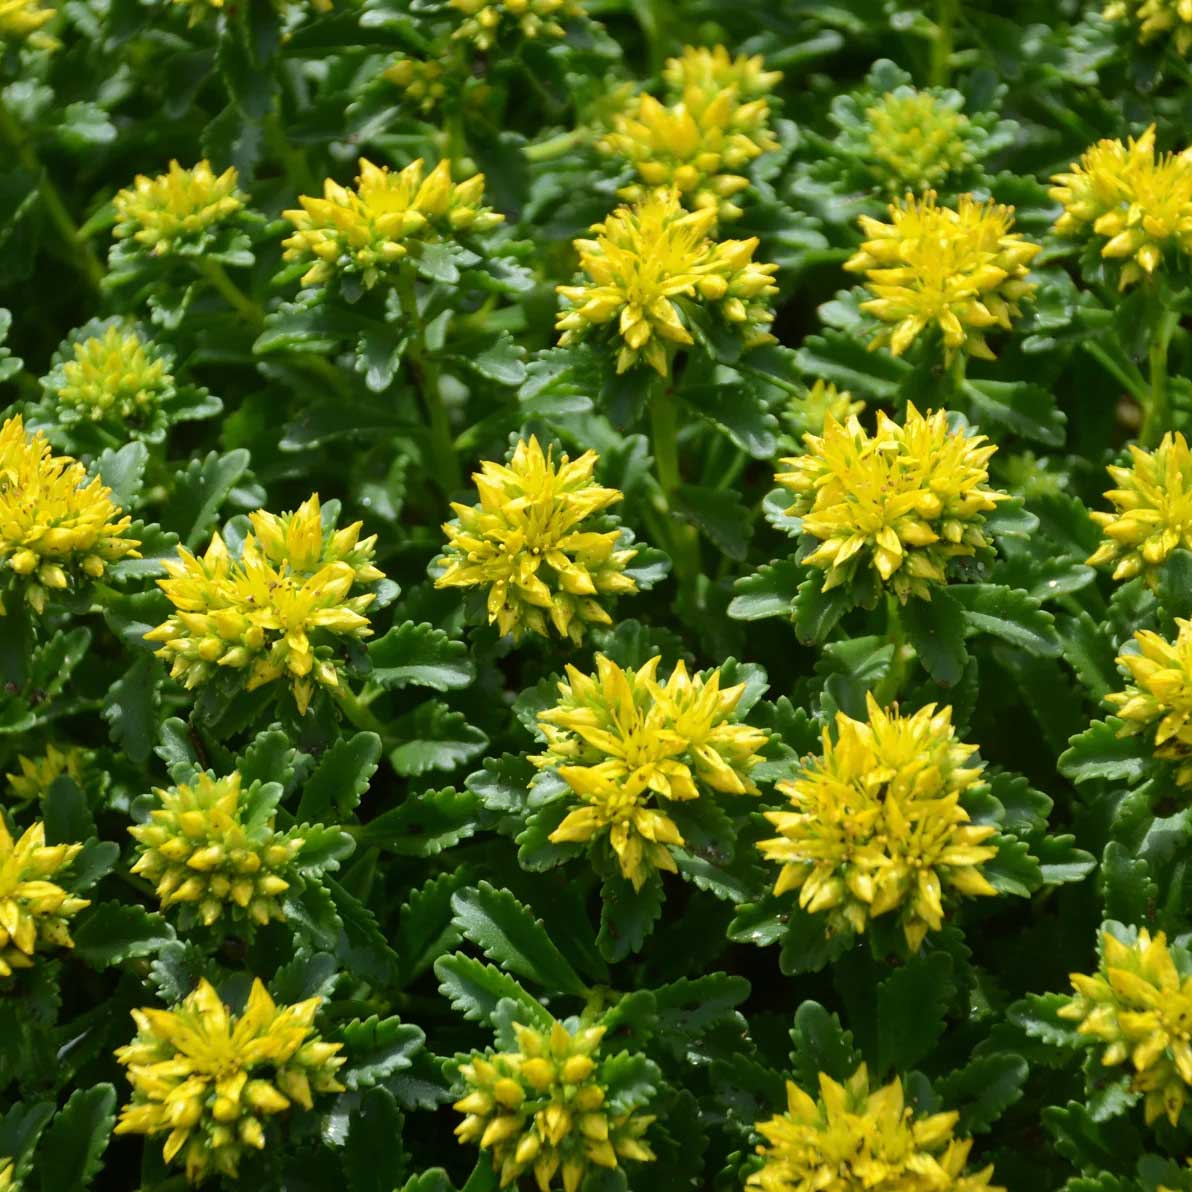 'Little Miss Sunshine' is prized for its incredibly dark green, glossy foliage, compact size, and tidiness in the landscape. From early to midsummer, tiny clusters of yellow flowers cover the polished habit. 